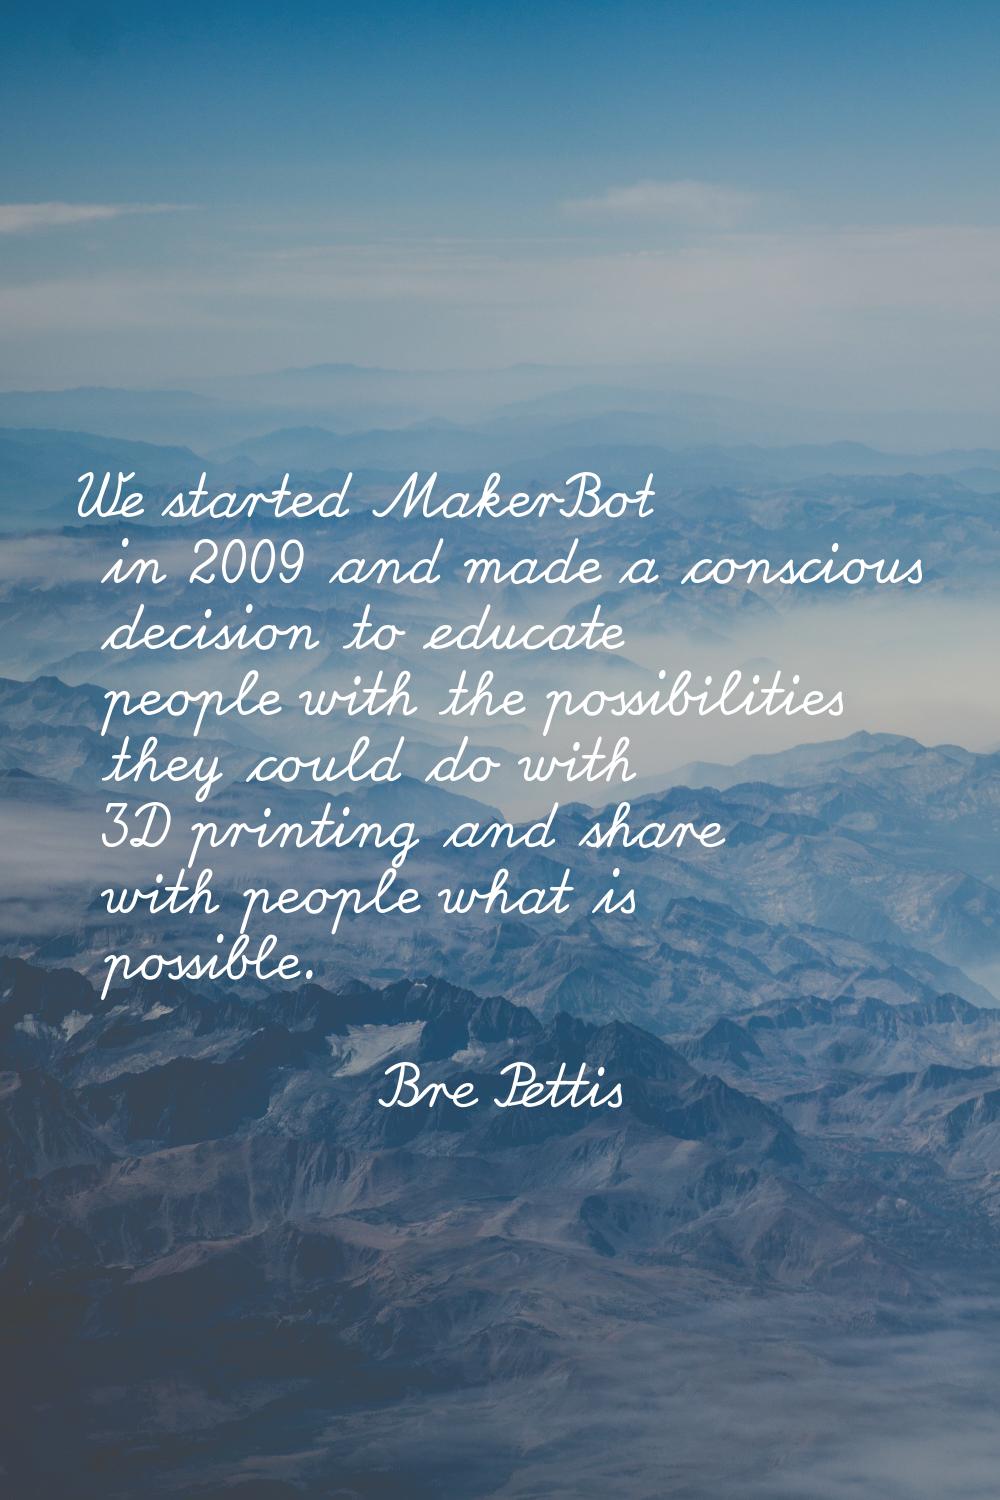 We started MakerBot in 2009 and made a conscious decision to educate people with the possibilities 